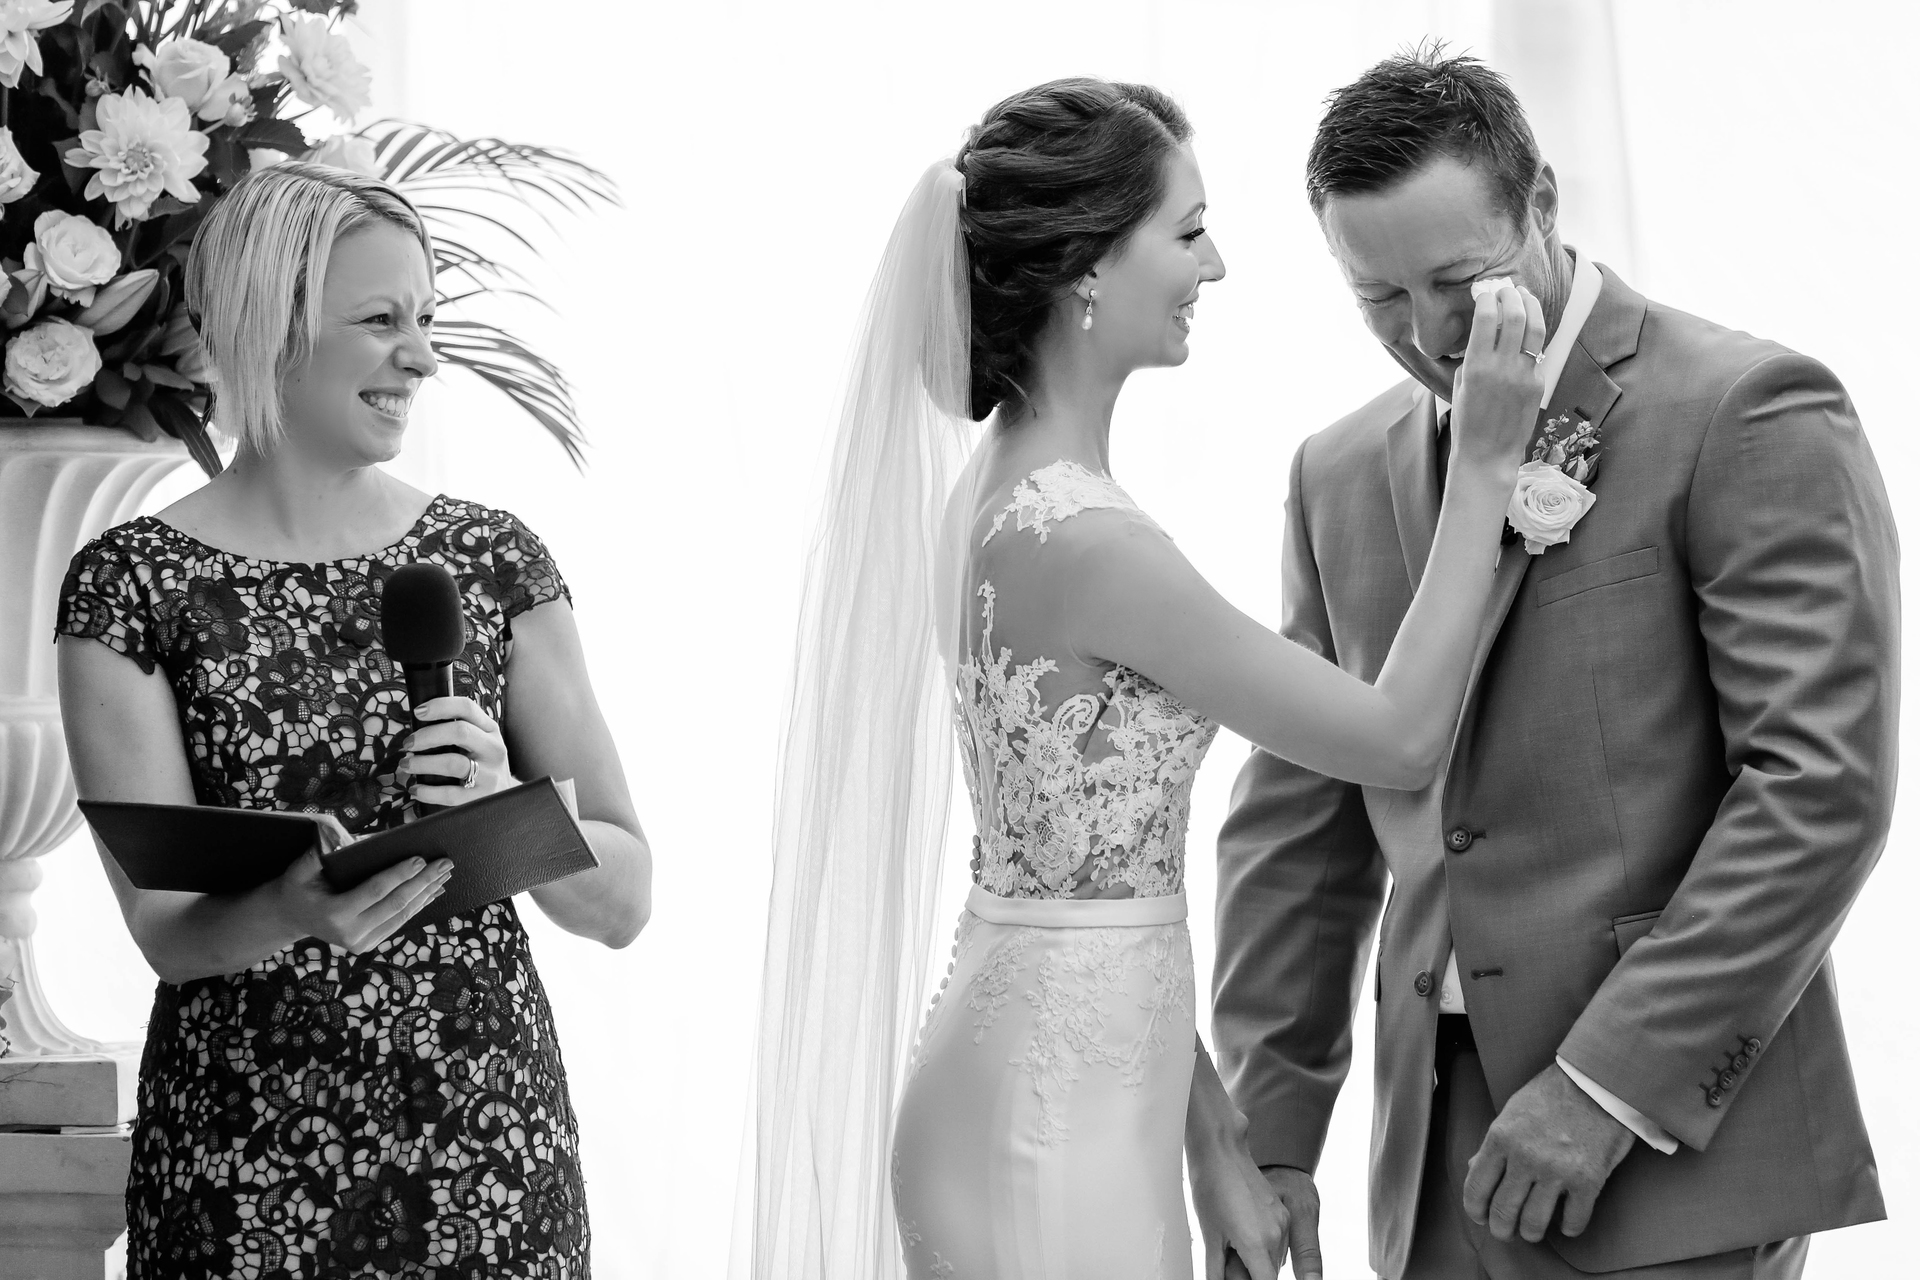 bride wiping tears from the groom while celebrant smiles